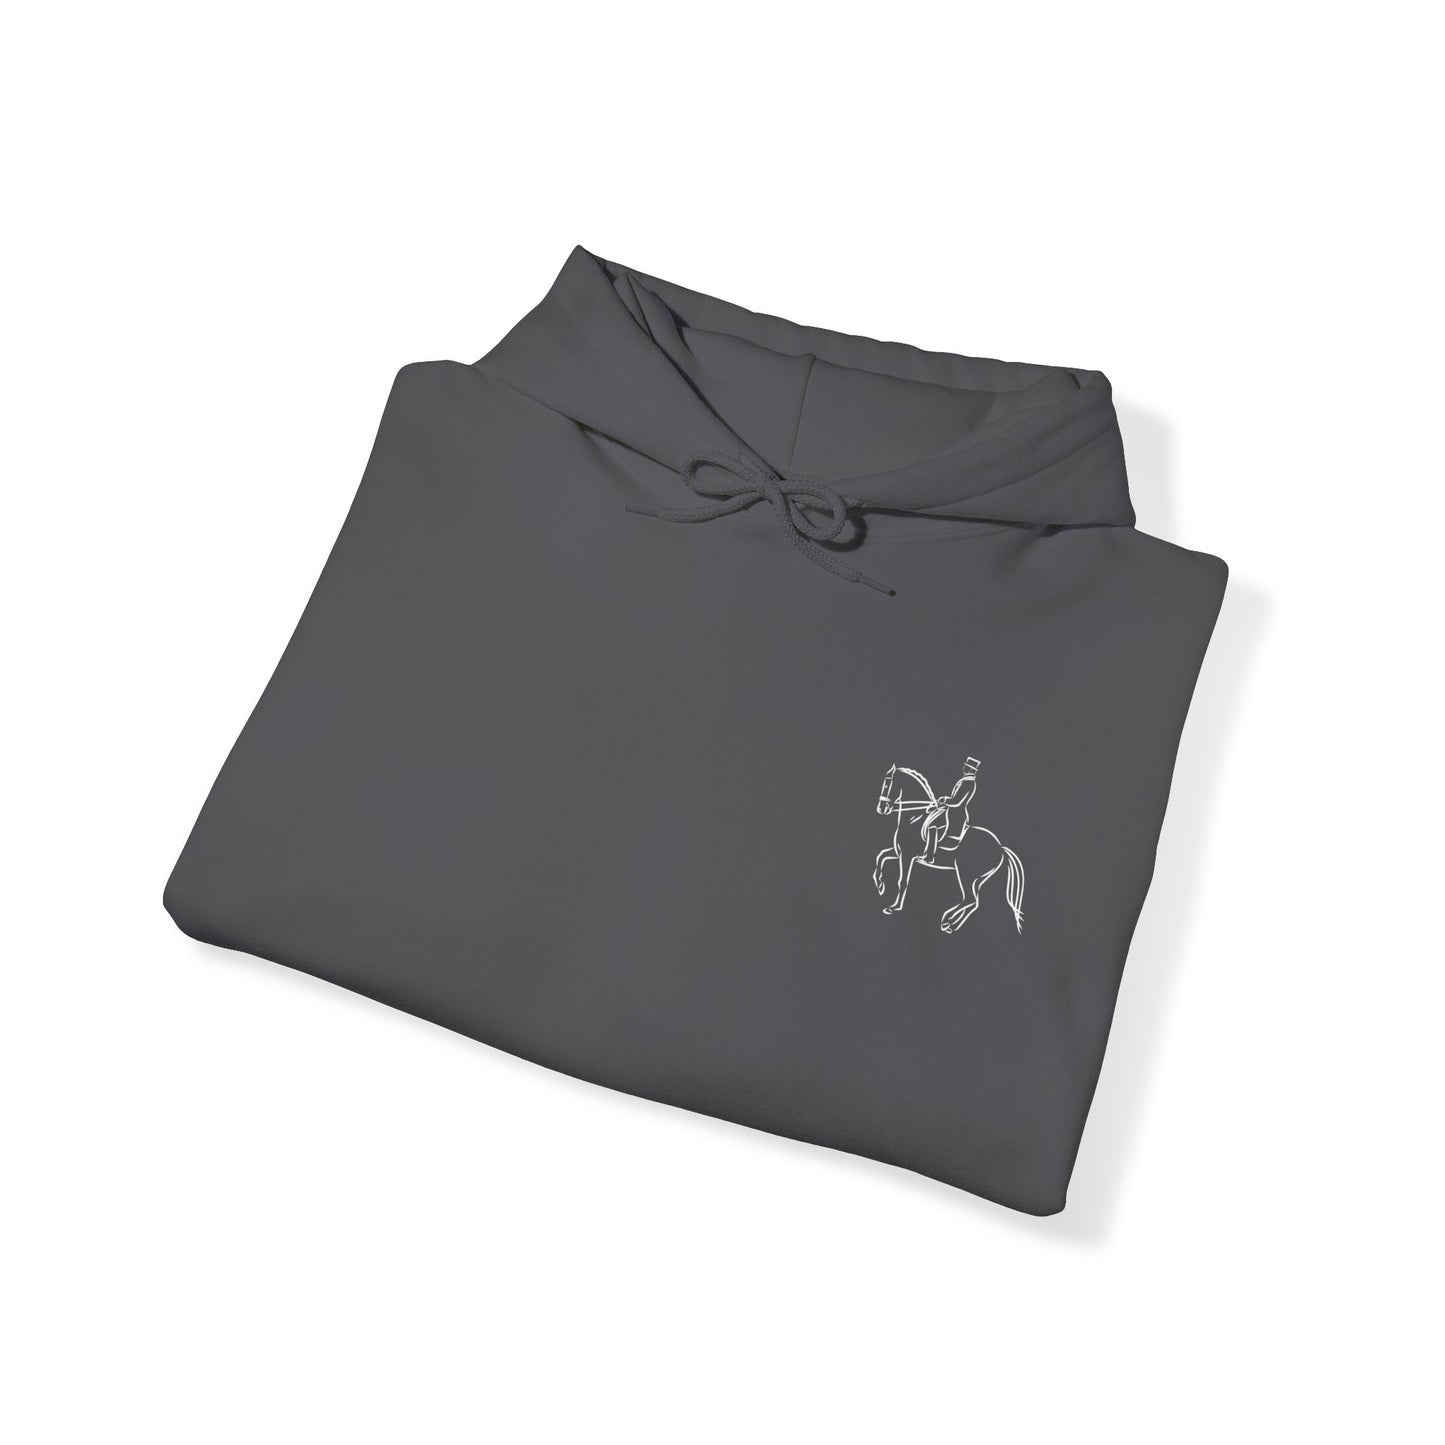 Dressage eXcellence Hoodie